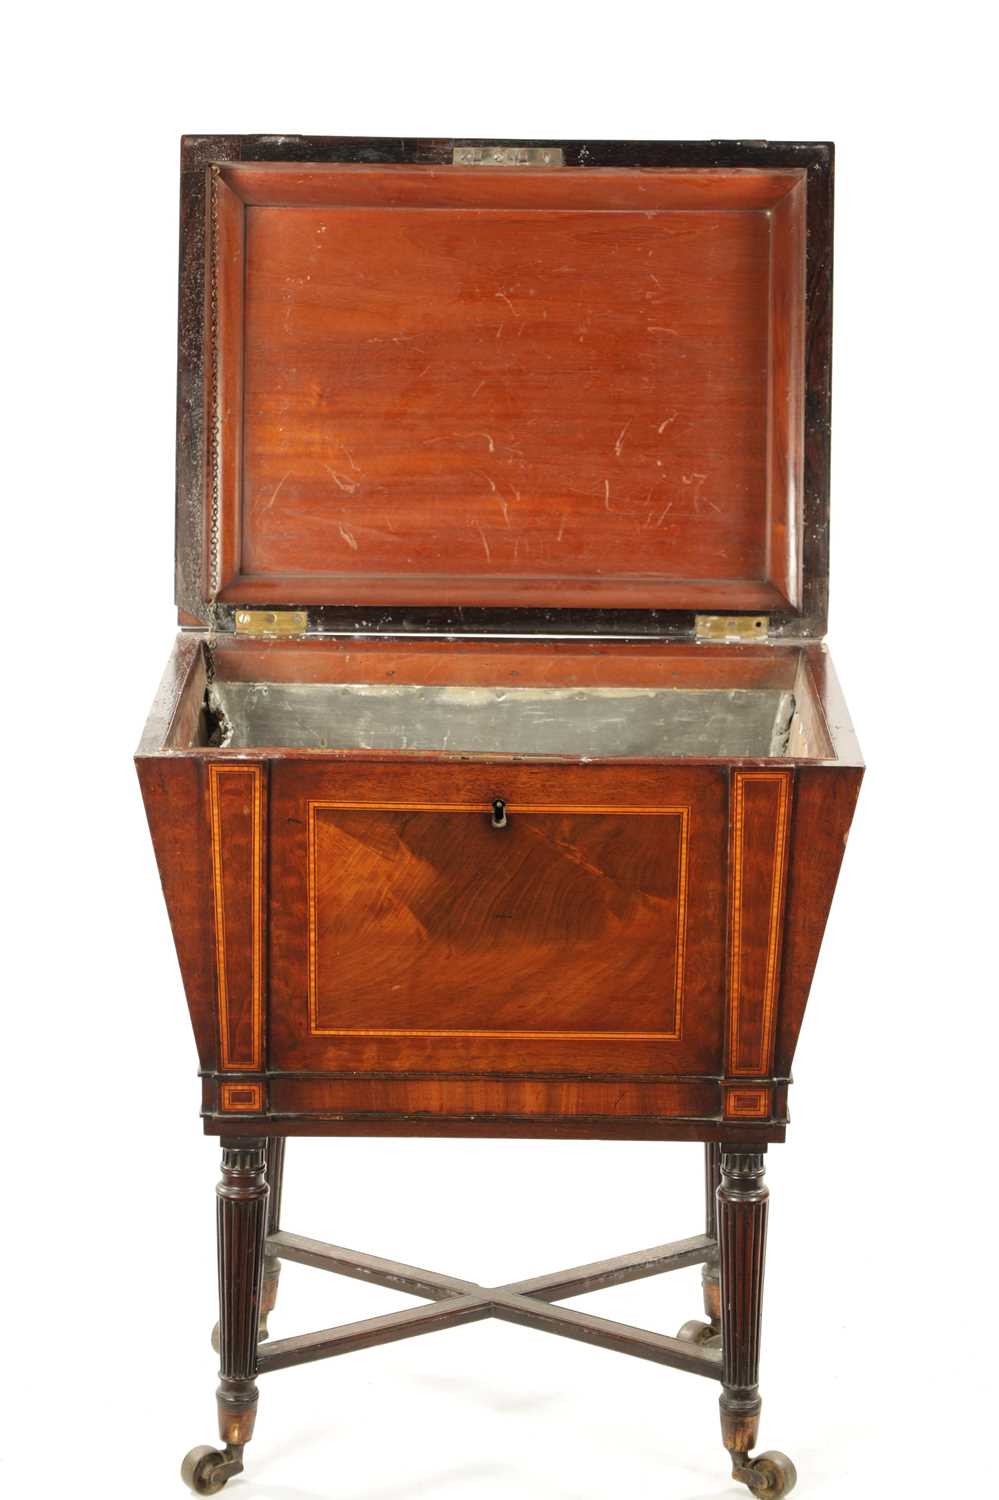 A REGENCY INLAID MAHOGANY CELLARETTE ON TAPERED FLUTED LEGS IN THE MANNER OF GILLOWS - Image 7 of 12